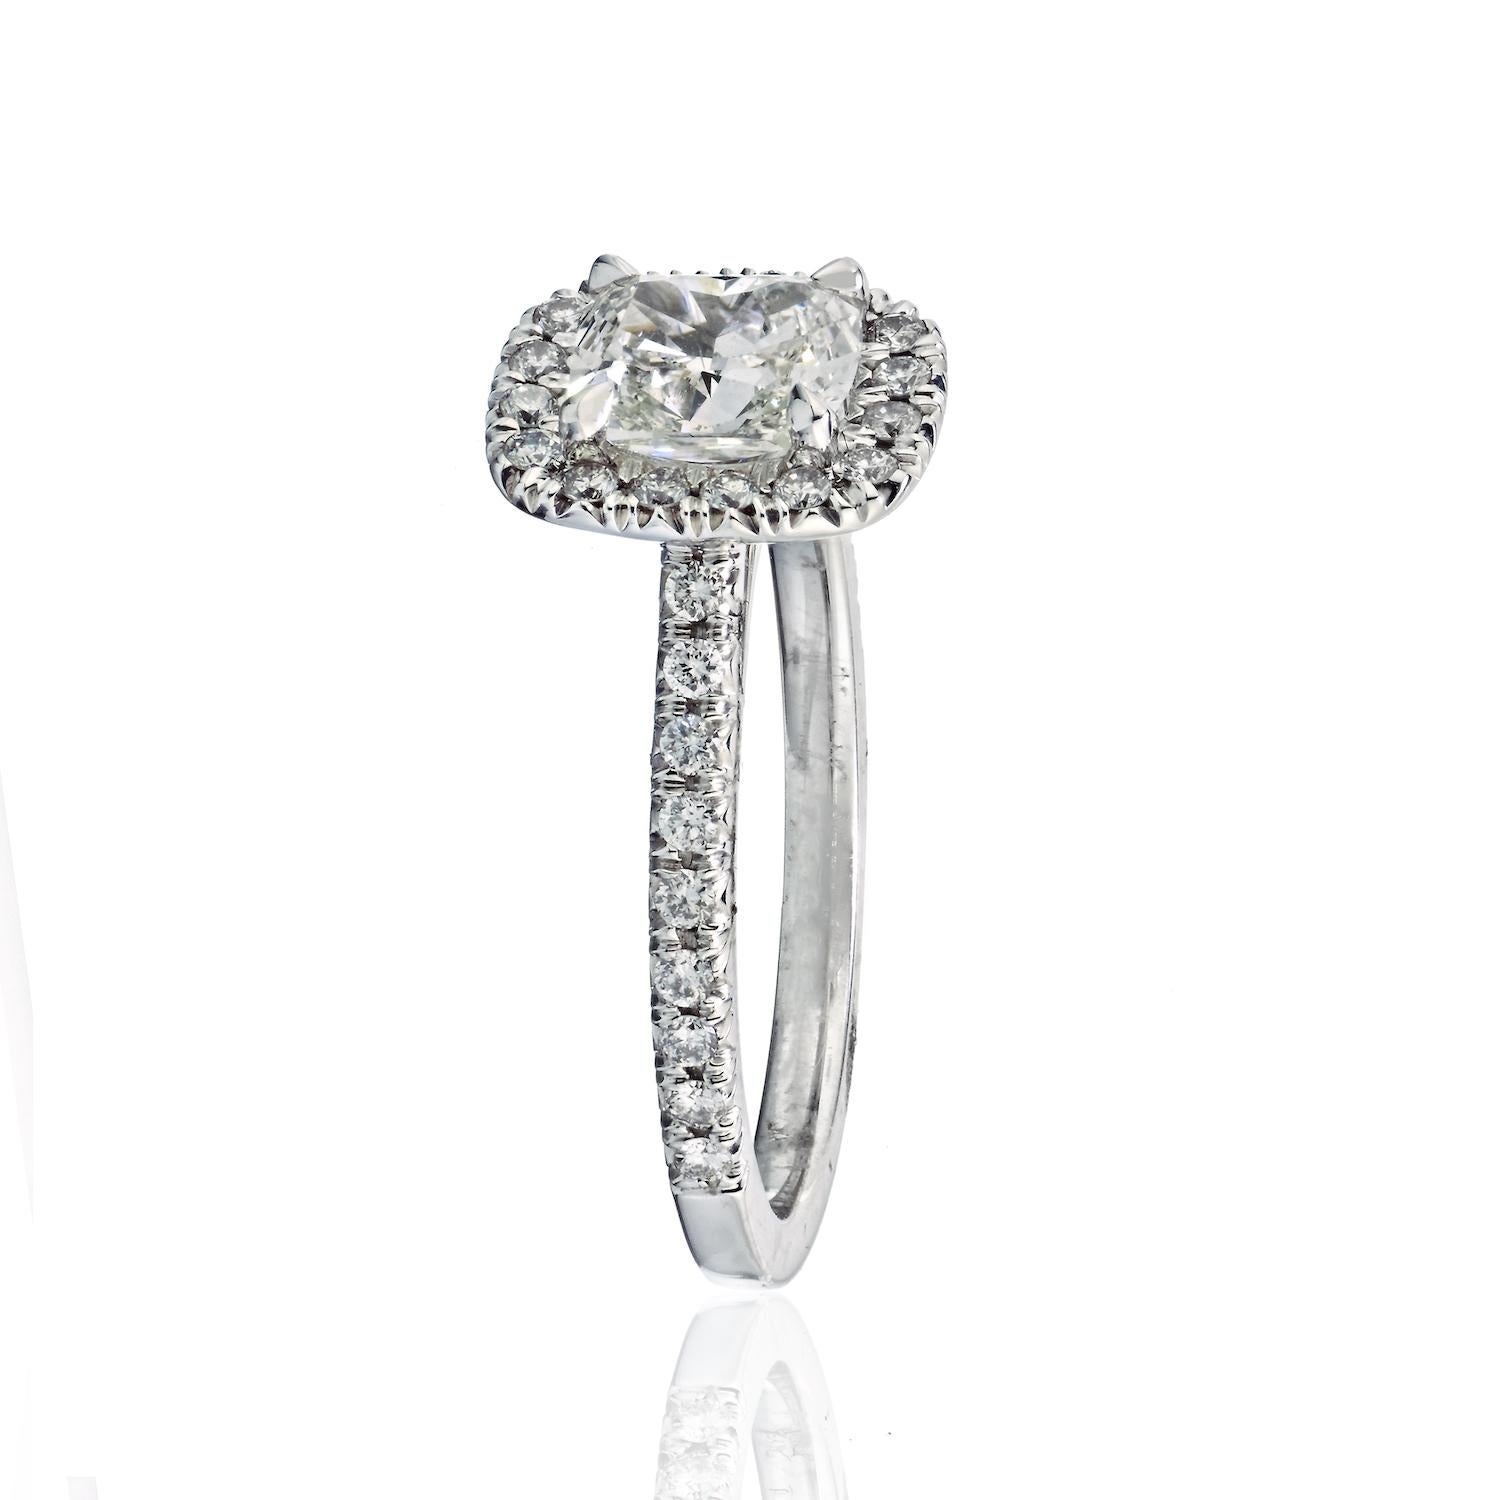 Engagement Cushion Cut Diamond Halo Ring 18K White Gold 1.06Cttw For Sale 2